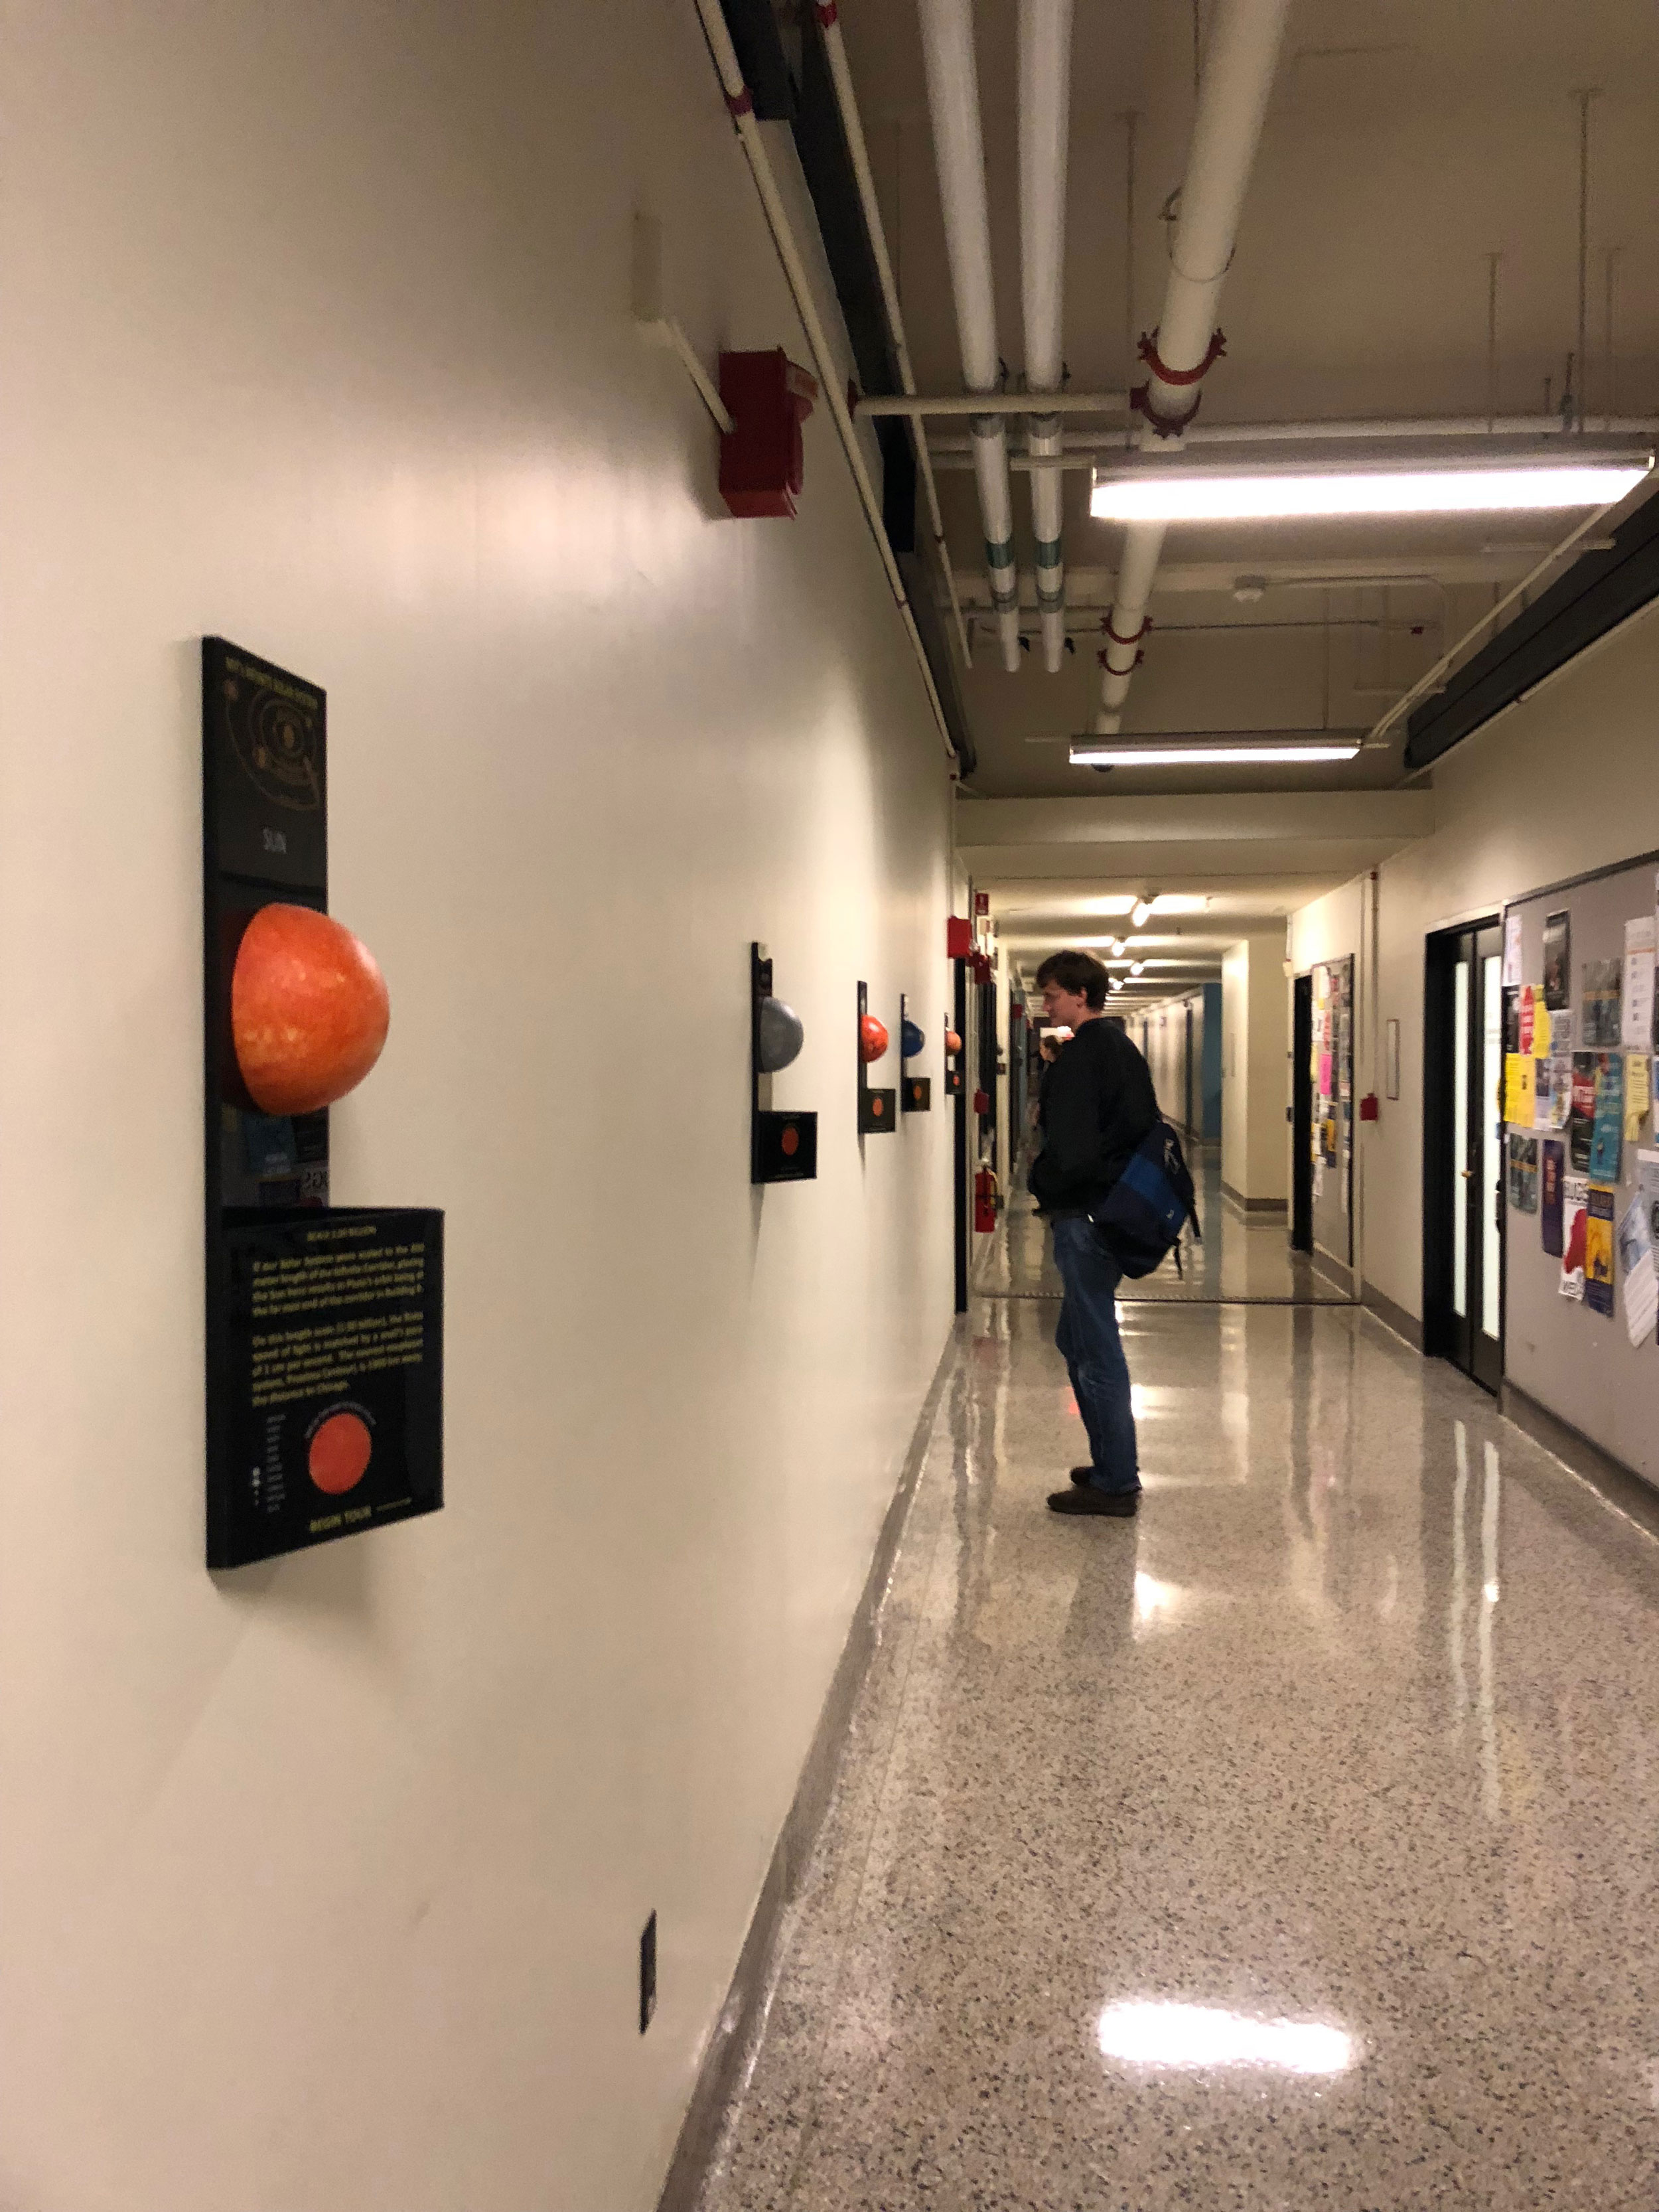 Student standing in hallway looking at model planets and informational plaques on wall